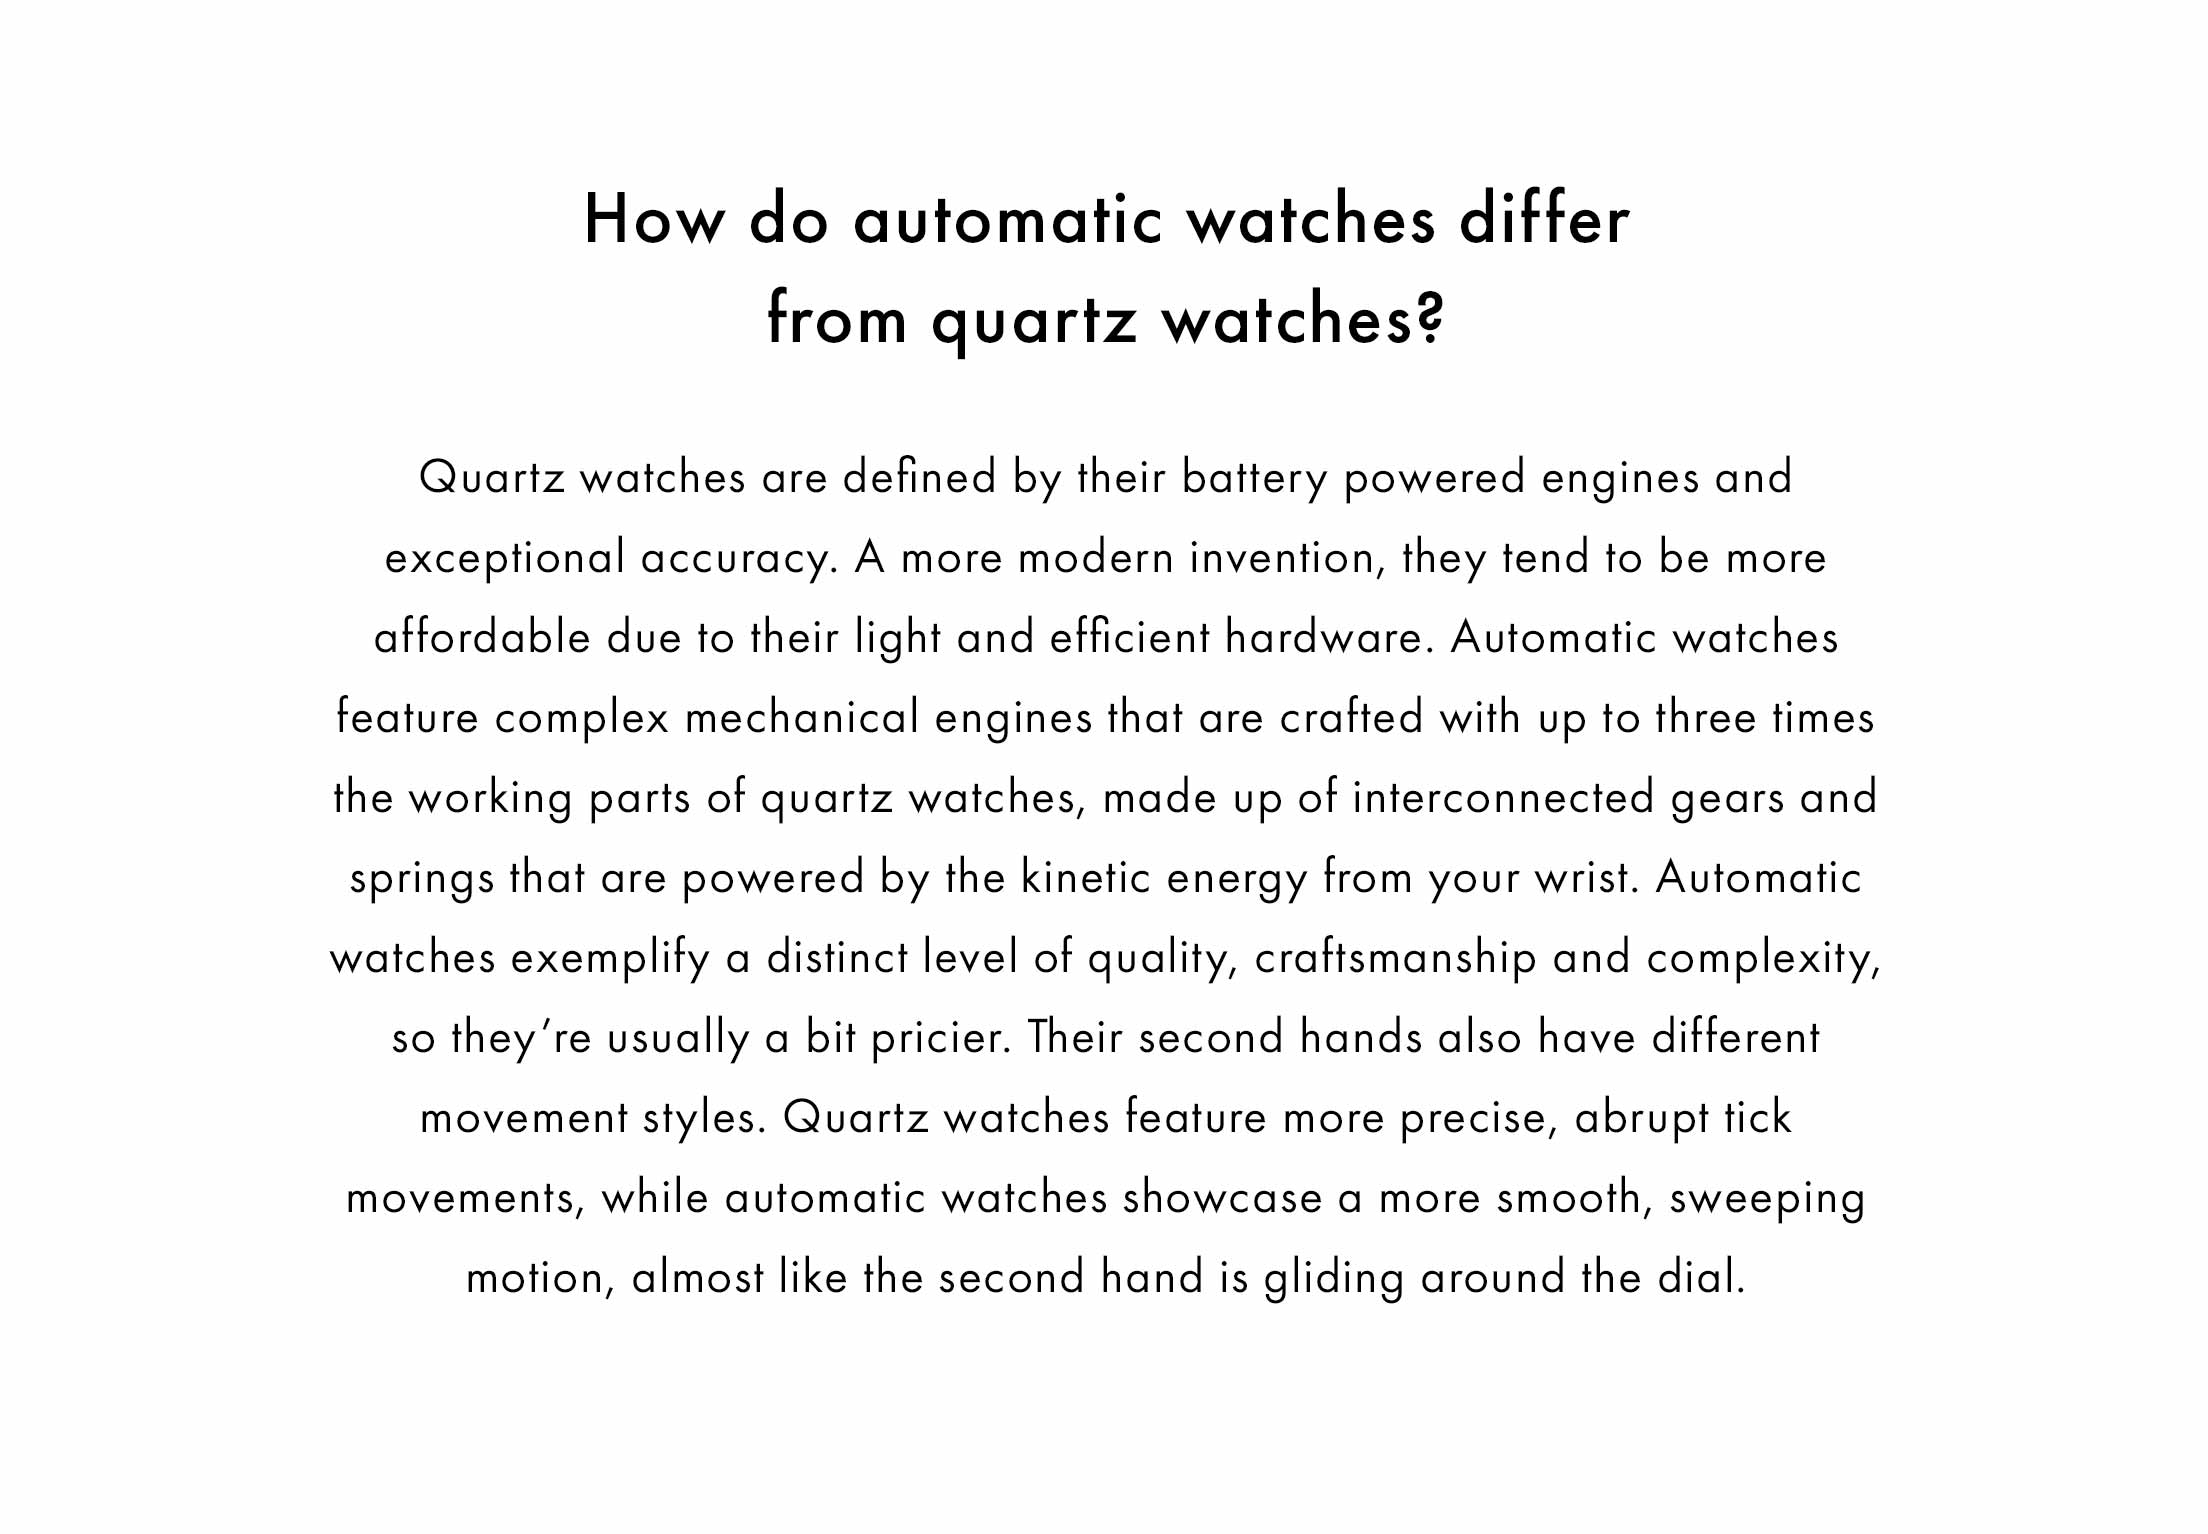 How do automatic watches differ from quartz watches?    Quartz watches are defined by their battery powered engines and exceptional accuracy. A more modern invention, they tend to be more affordable due to their light and efficient hardware. Automatic watches feature complex mechanical engines that are crafted with up to three times the working parts of quartz watches, made up of interconnected gears and springs that are powered by the kinetic energy from your wrist. Automatic watches exemplify a distinct level of quality, craftsmanship and complexity, so they’re usually a bit pricier. Their second hands also have different movement styles. Quartz watches feature more precise, abrupt tick movements, while automatic watches showcase a more smooth, sweeping motion, almost like the second hand is gliding around the dial.